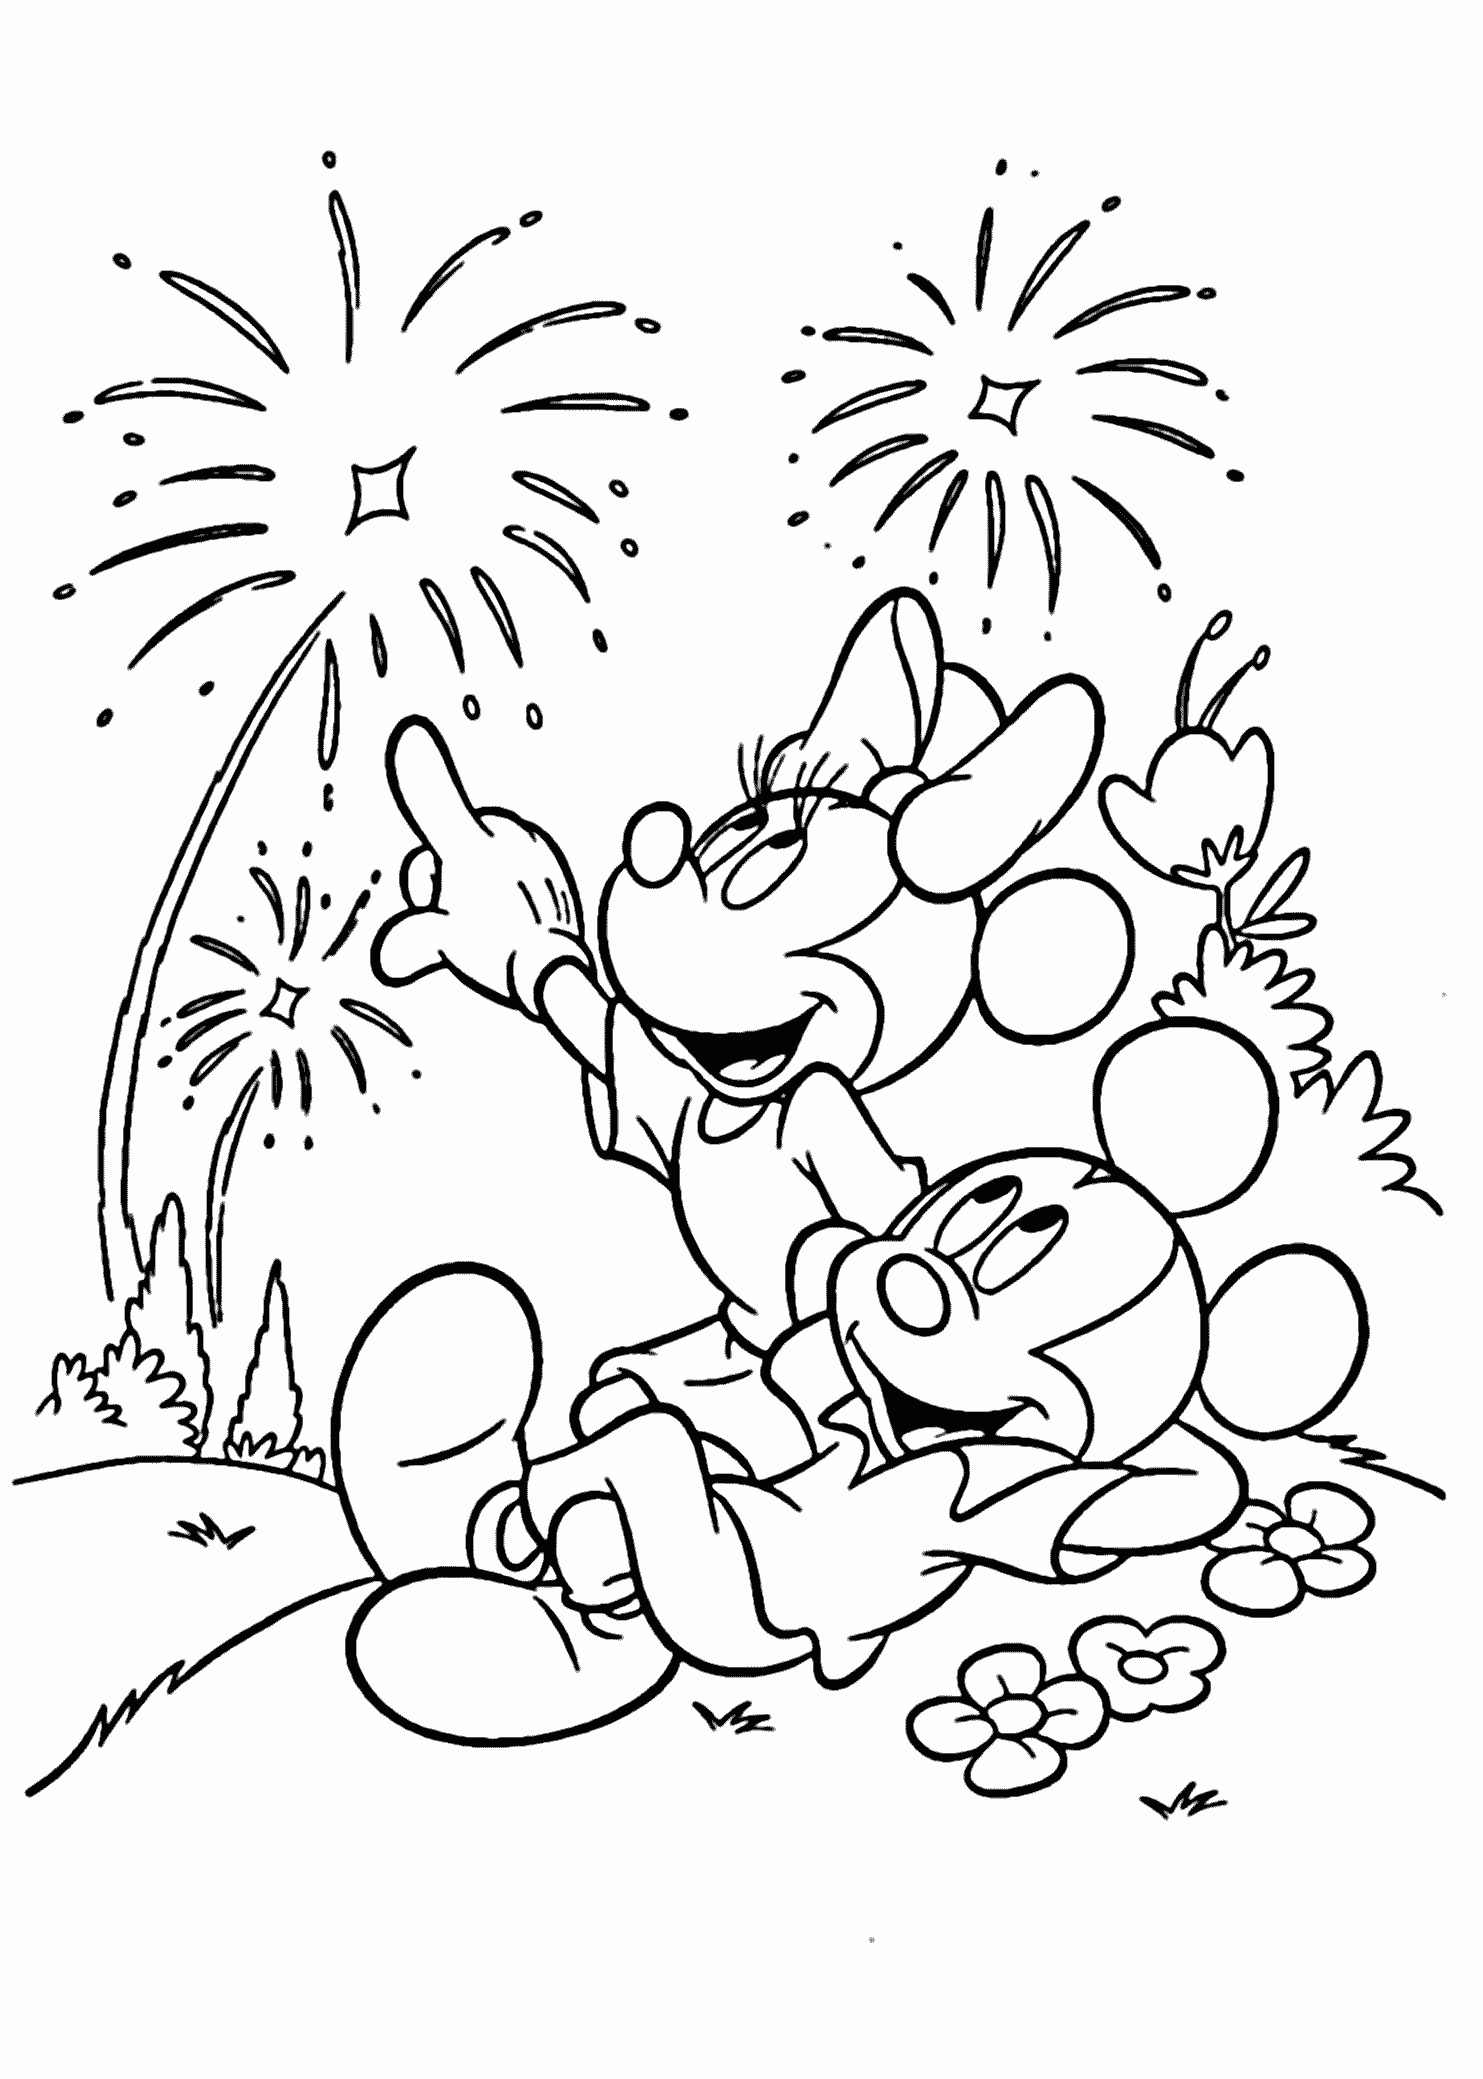 4Th Of July Coloring Pages - Best Coloring Pages For Kids - Free Printable 4Th Of July Coloring Pages